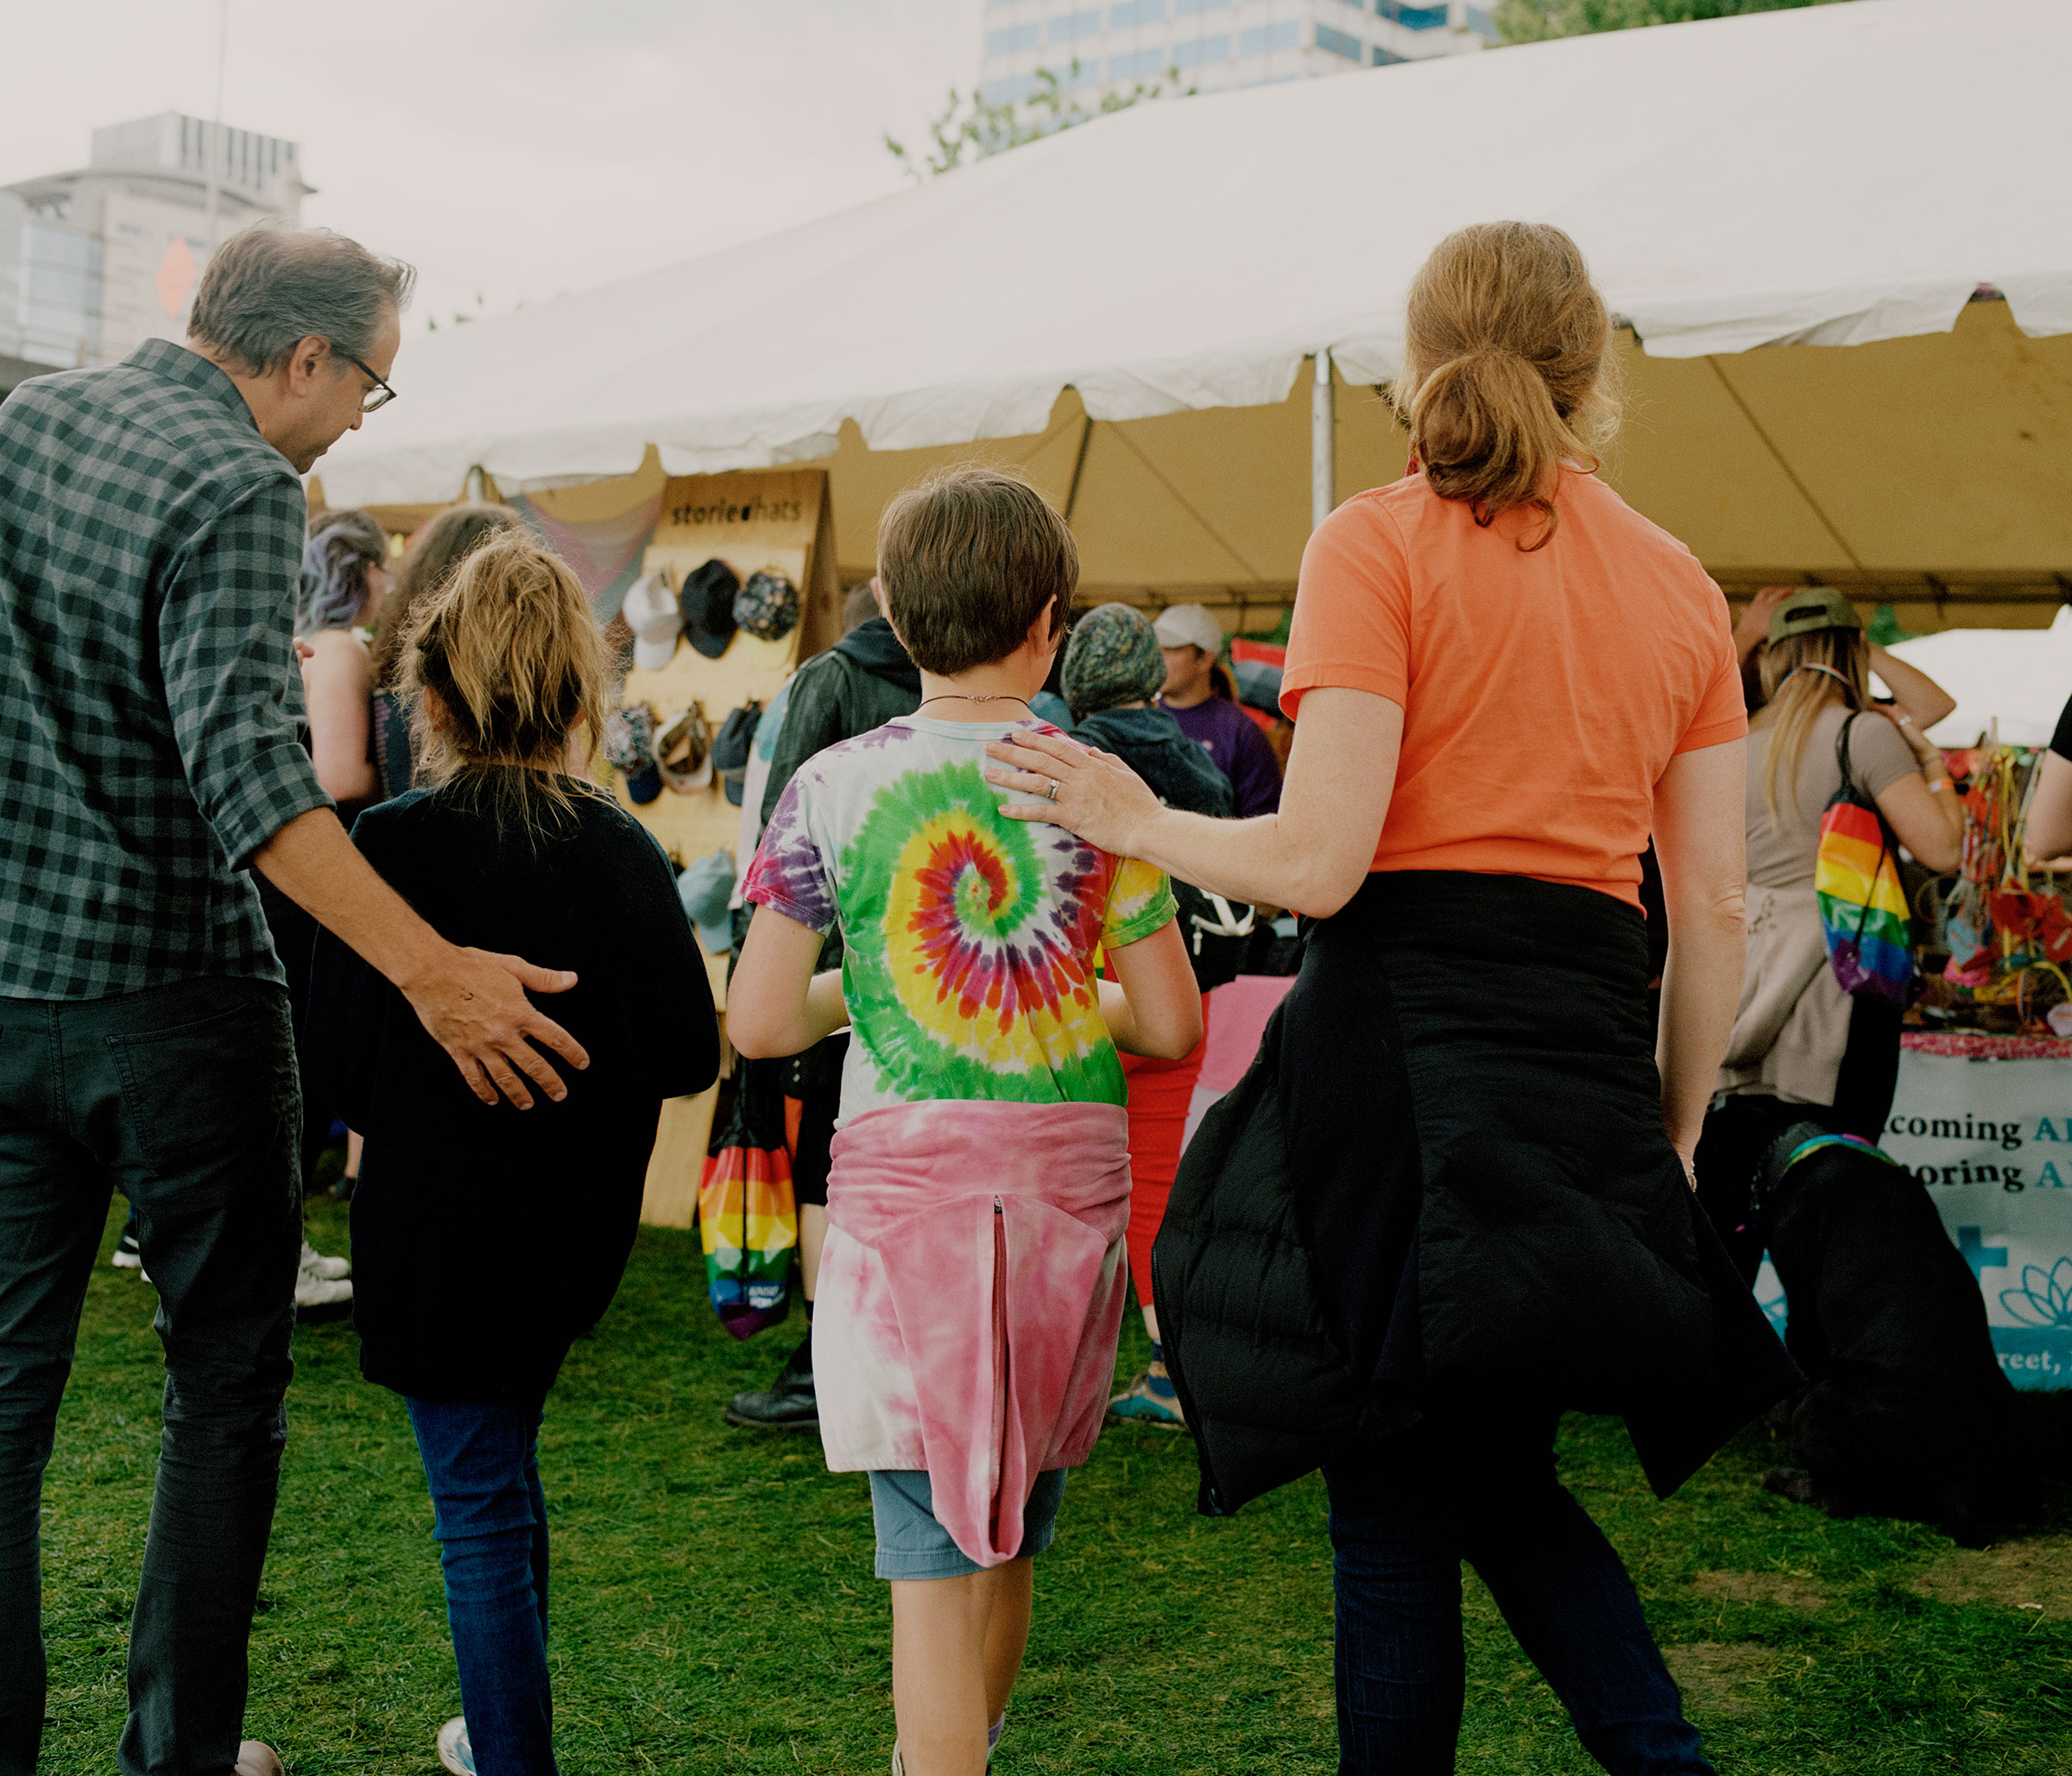 Karen, Chris and their kids attend Portland’s Pride festival, as they settle into their new home town. (Ricardo Nagaoka for TIME)